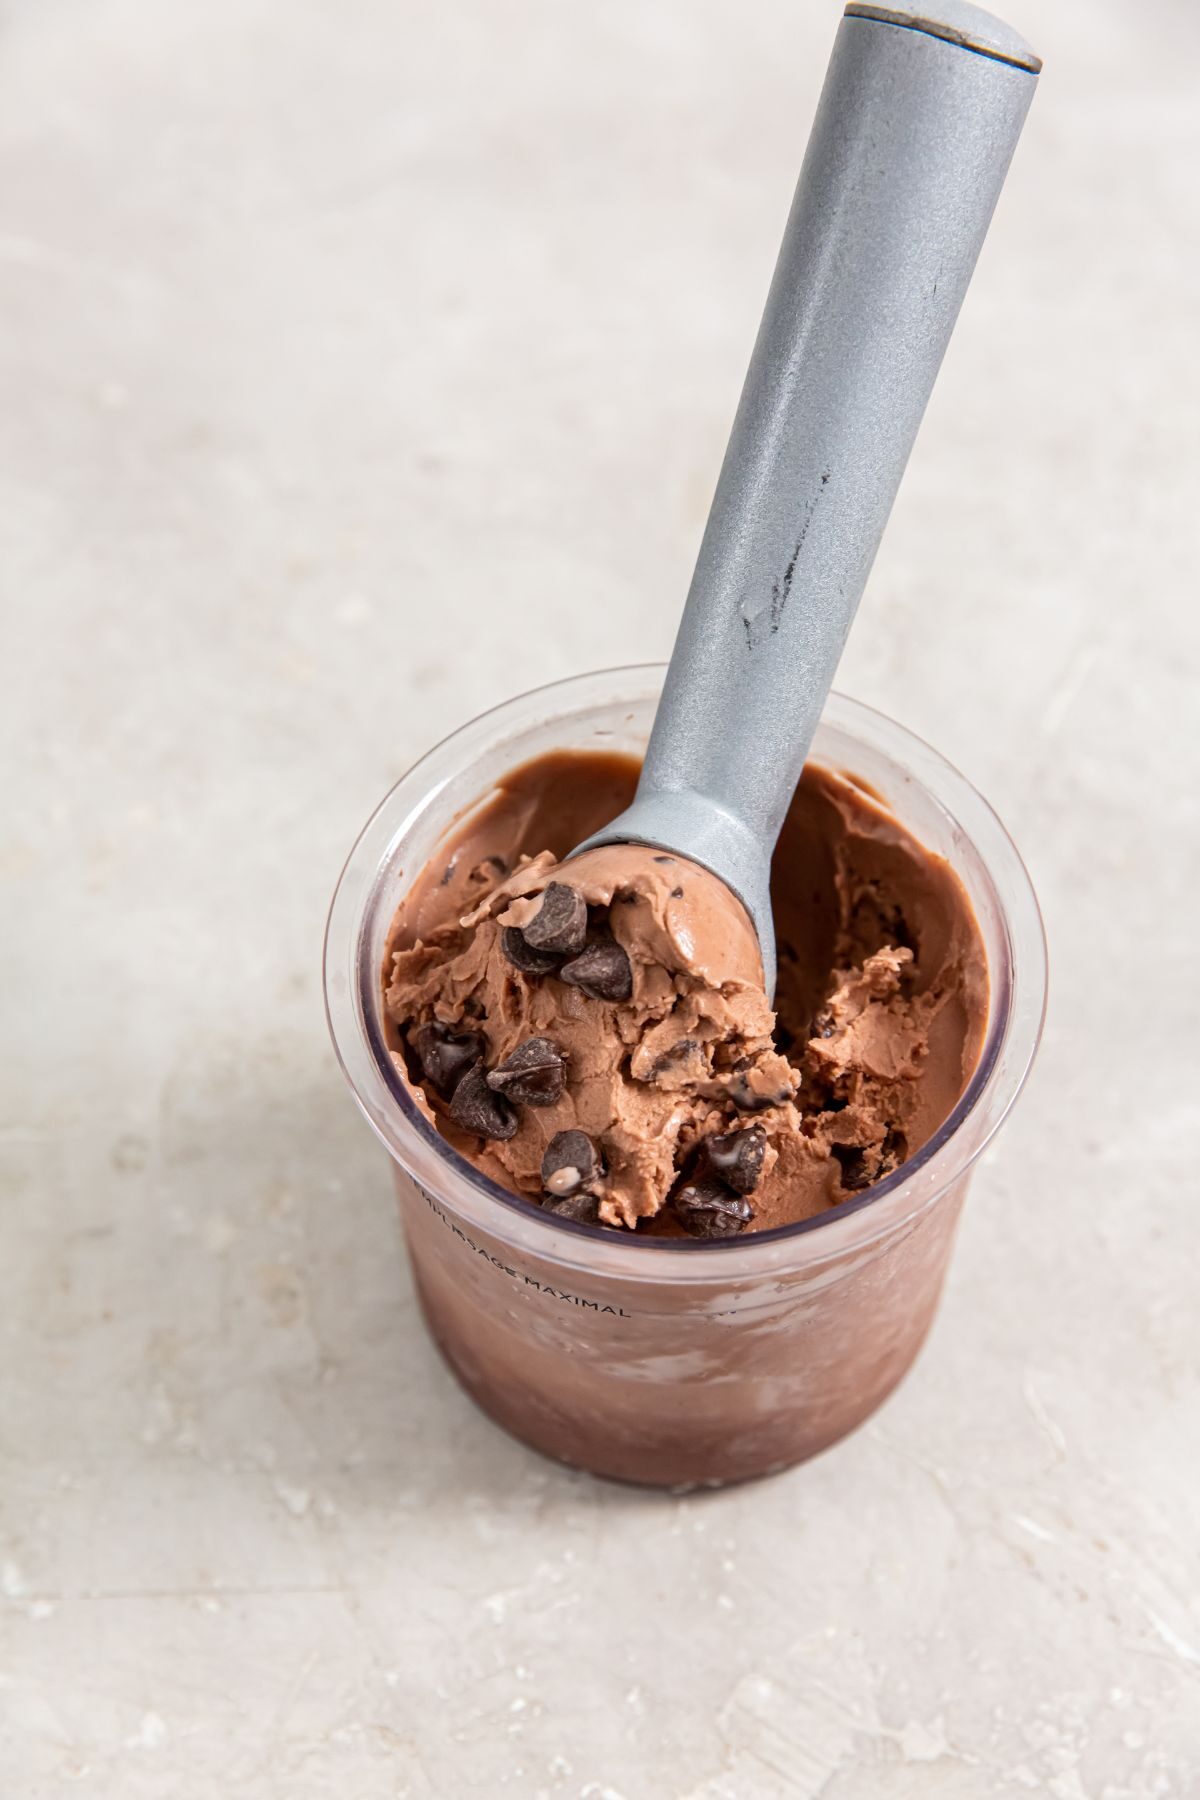 chocolate chocolate chip ice cream in a pint container with an ice cream scoop